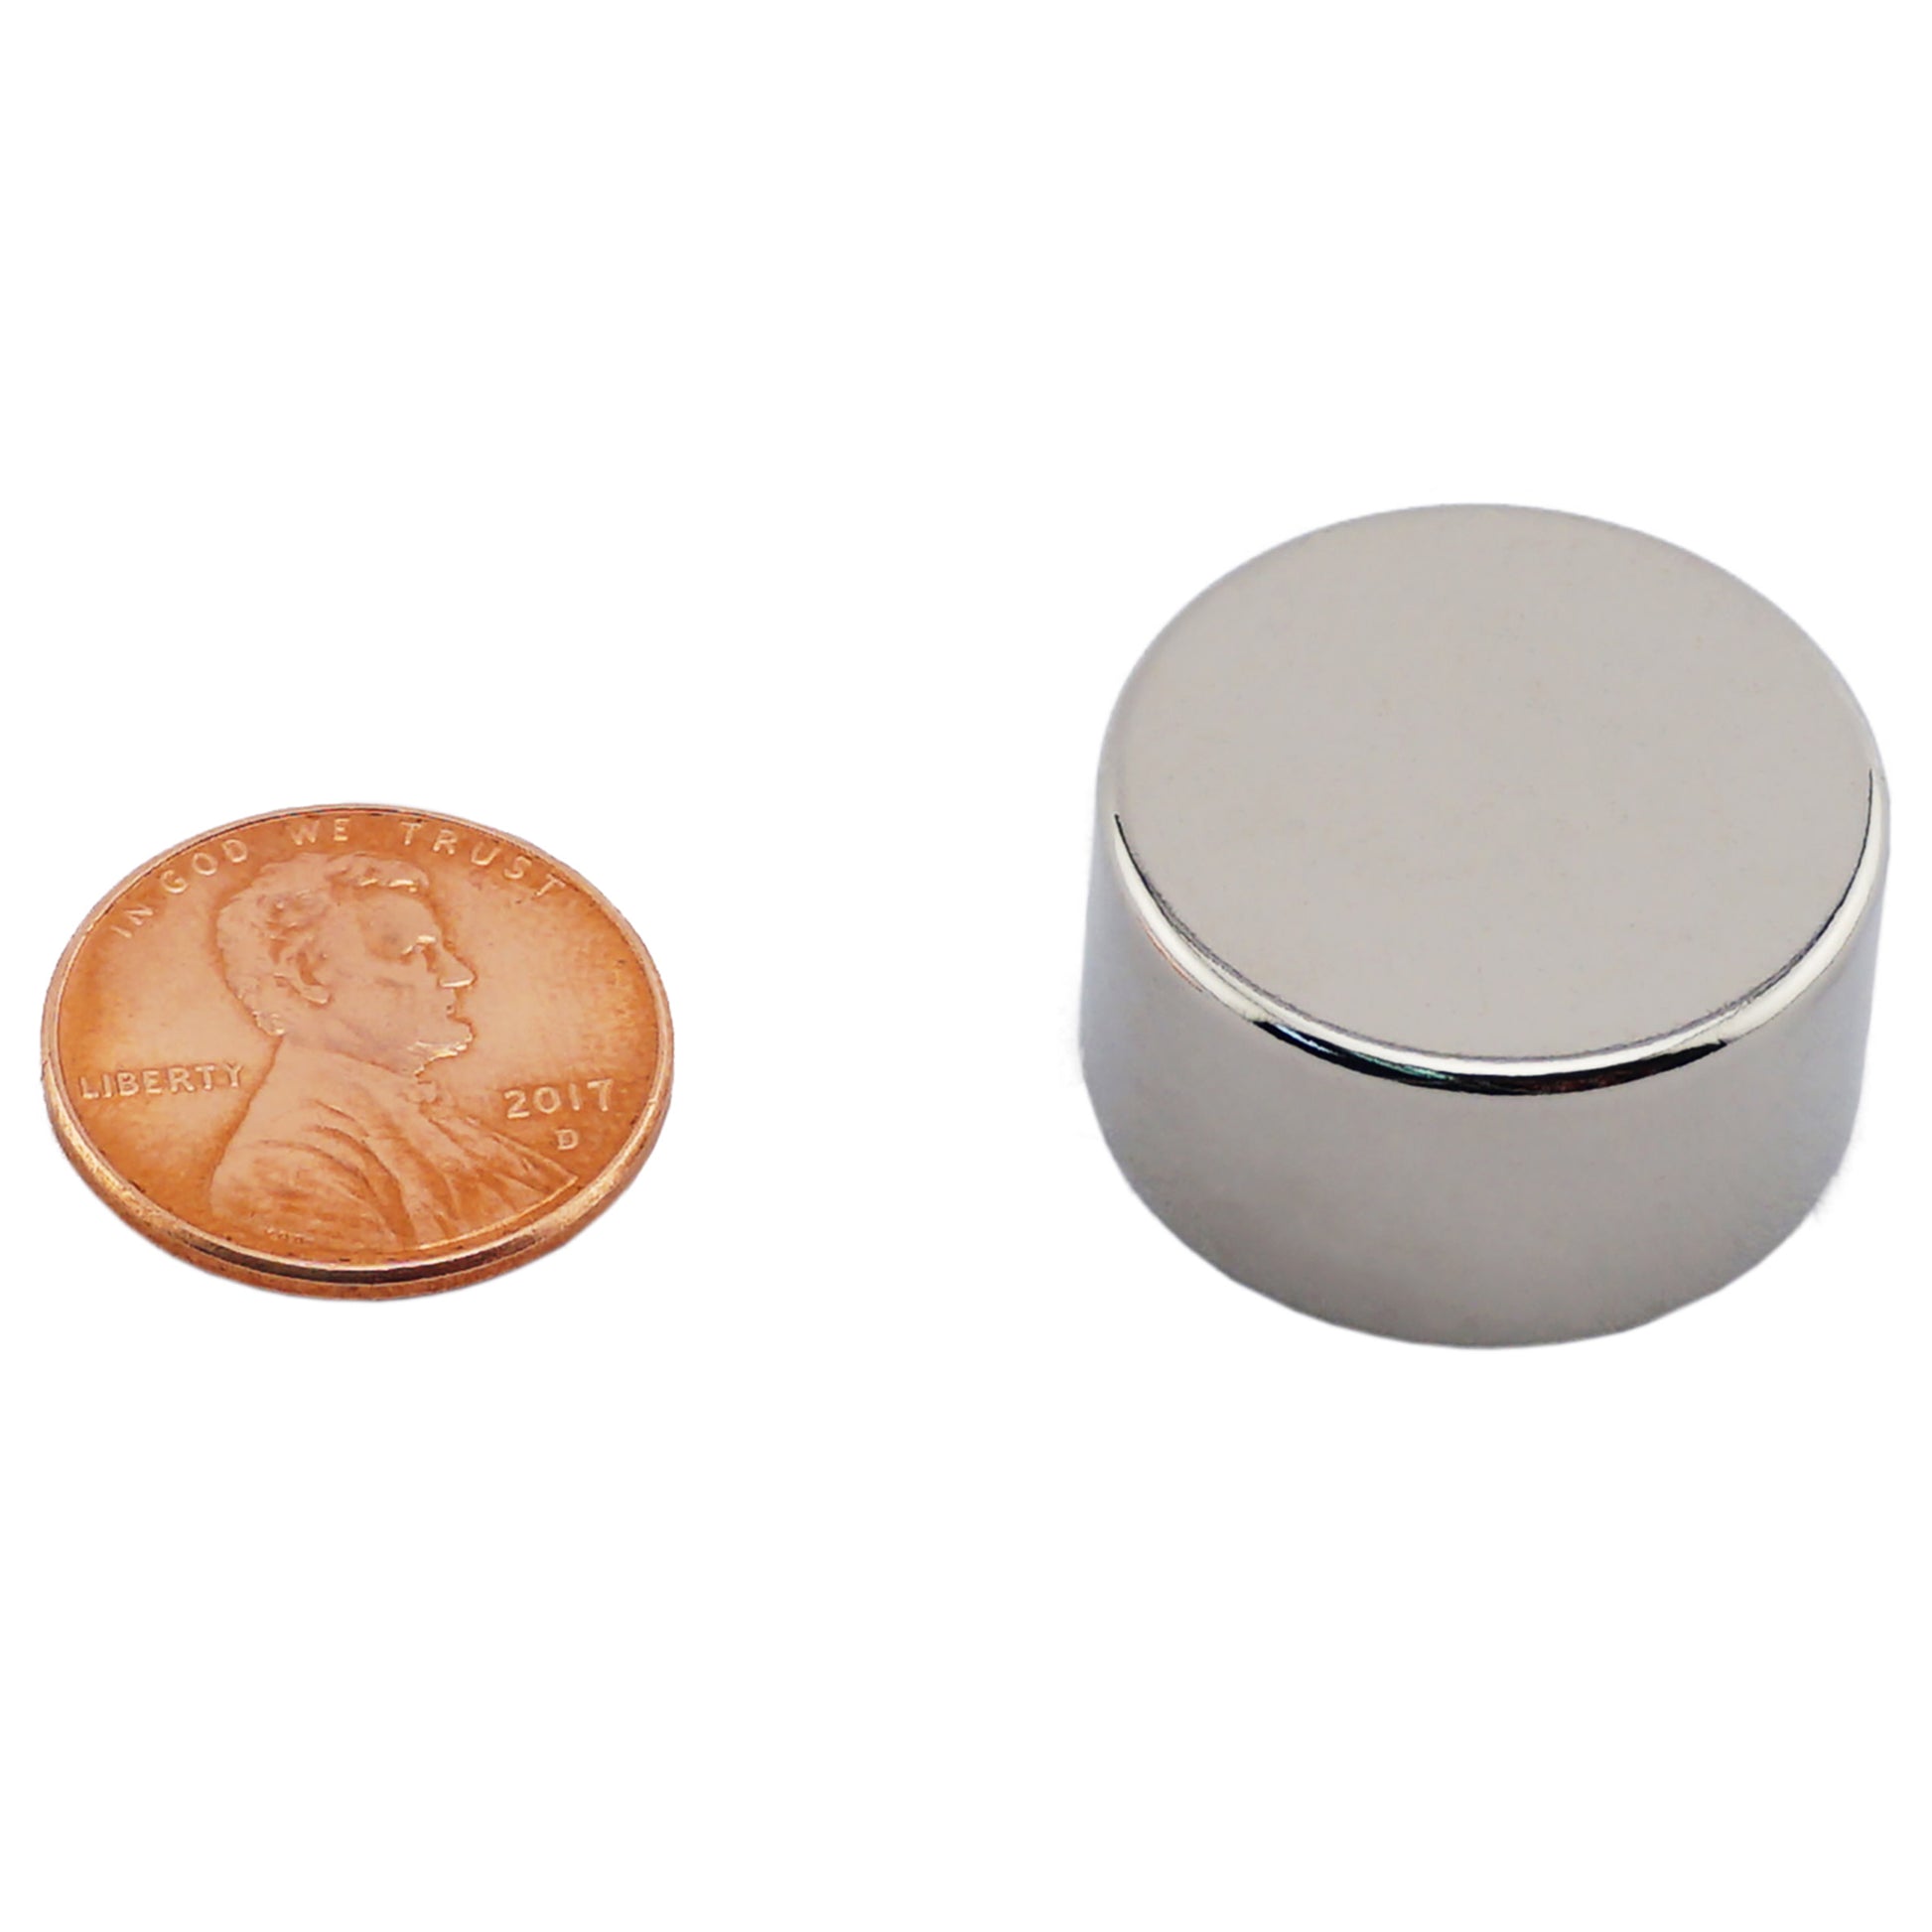 Load image into Gallery viewer, ND009302N Neodymium Disc Magnet - Compared to Penny for Size Reference